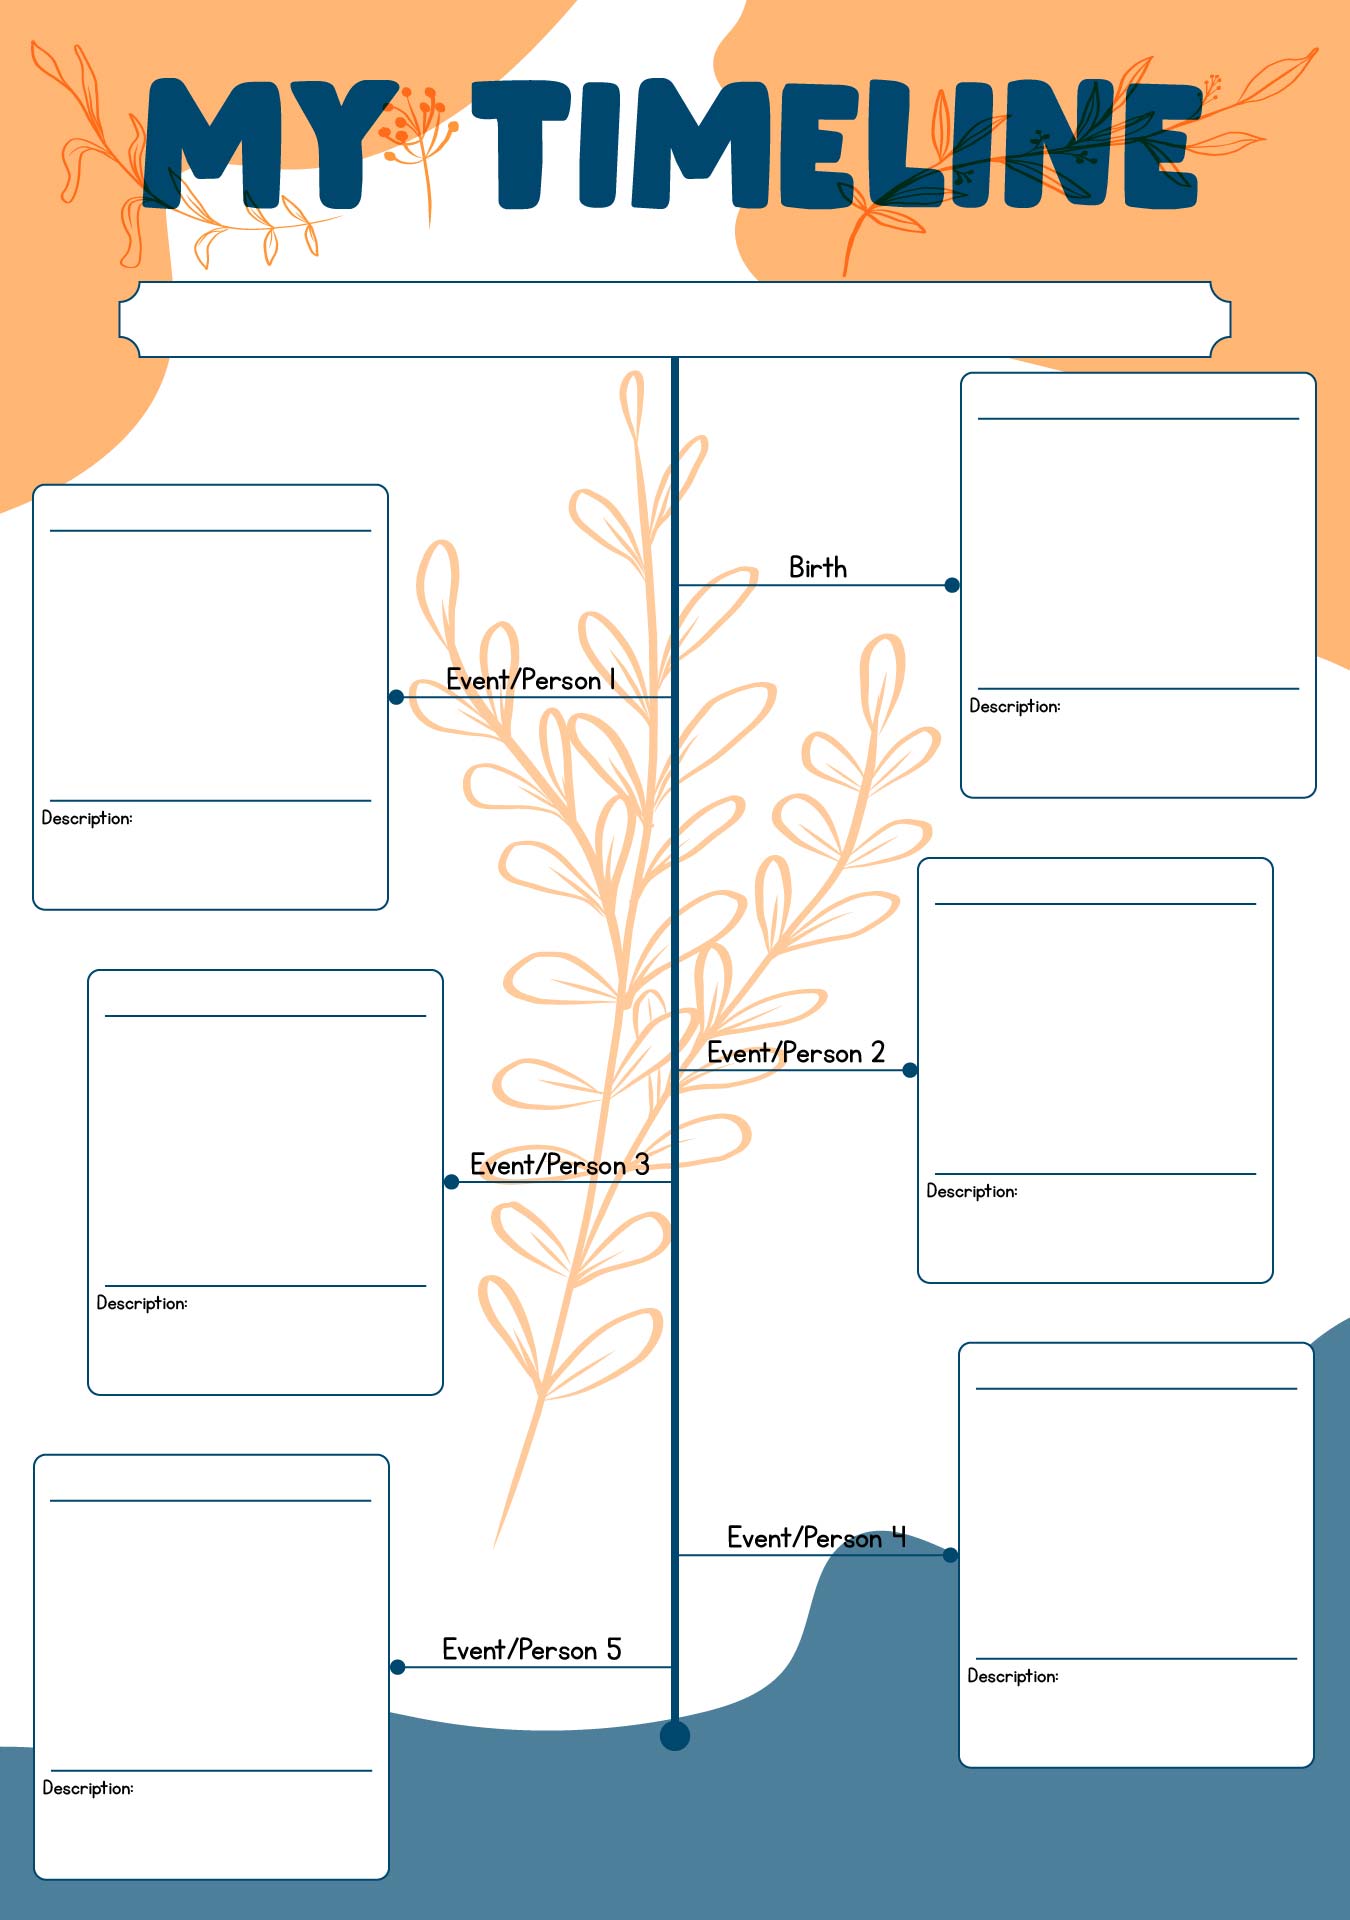 All About Me Timeline Printable Project